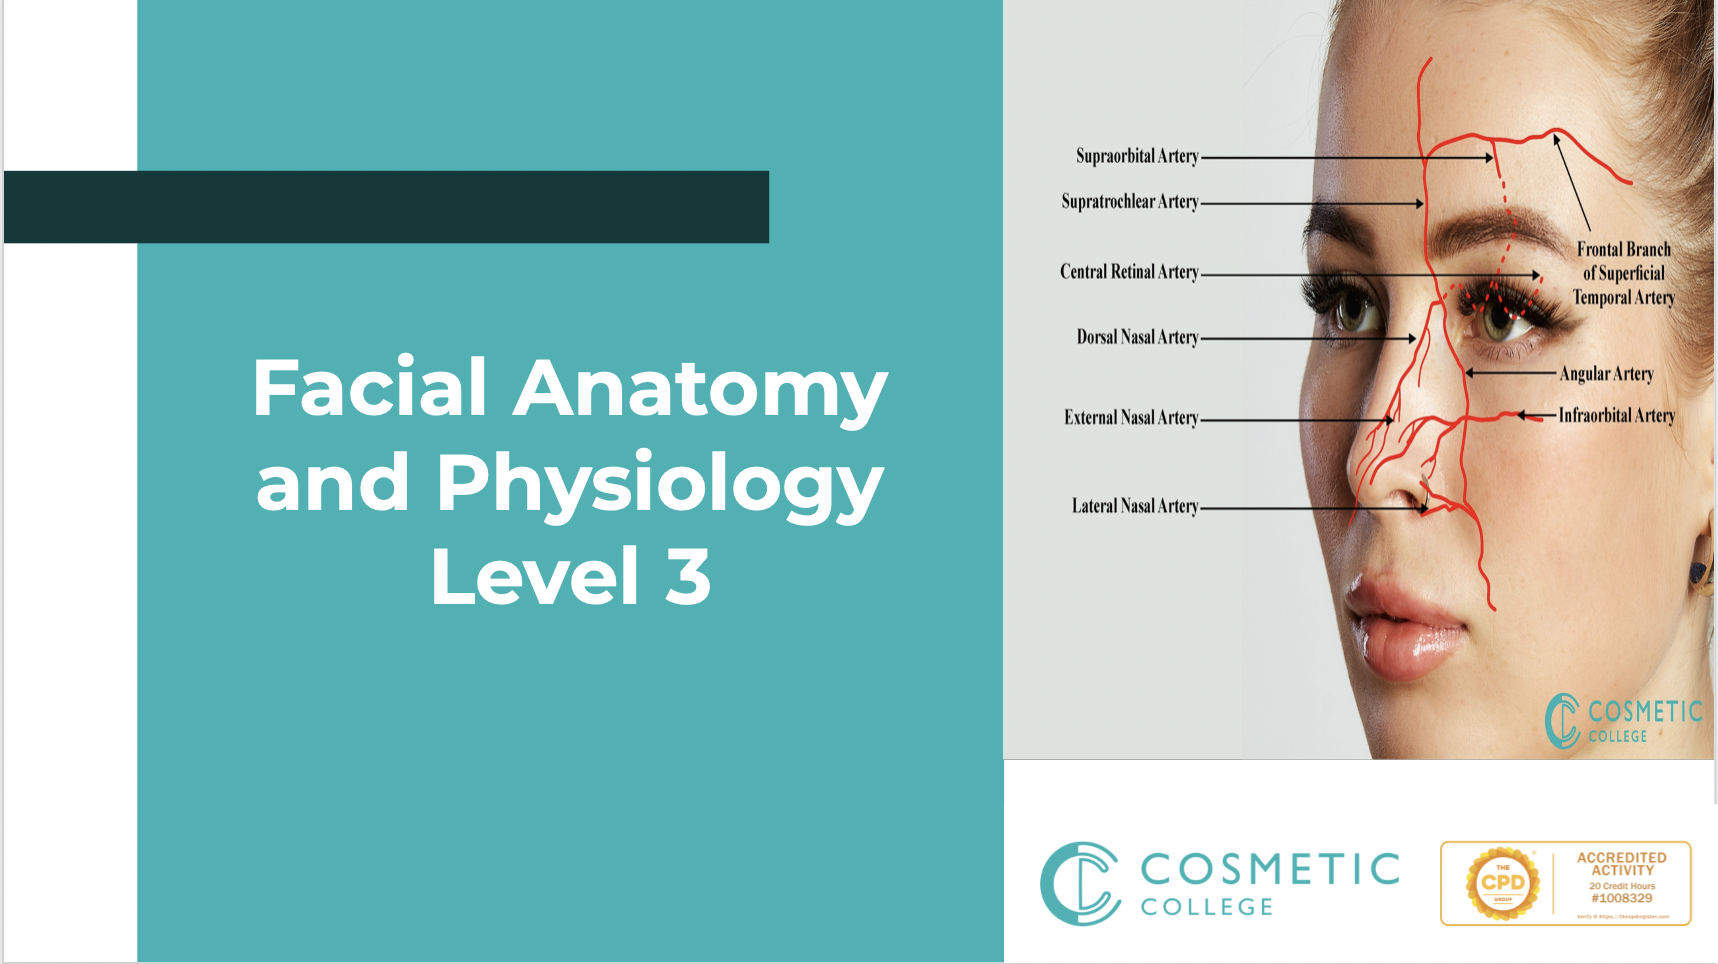 Facial Anatomy and Physiology Level 3 Training Course